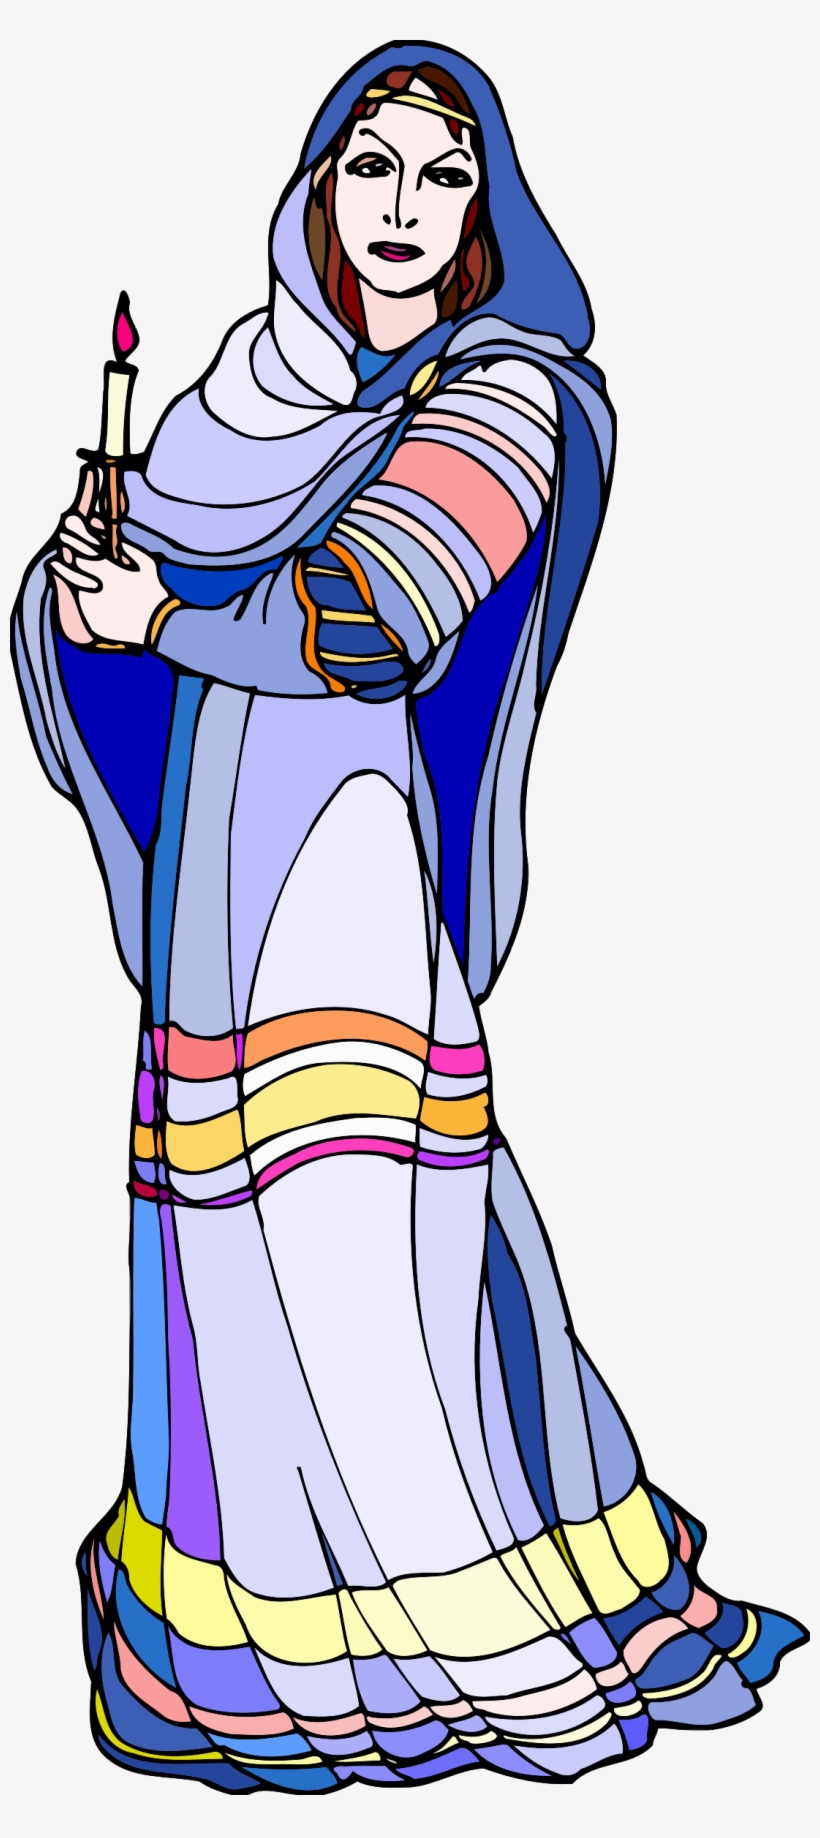 Jpg Transparent Library Characters Lady Macbeth Colour - Macbeth Characters Lady Macbeth, transparent png #1306906